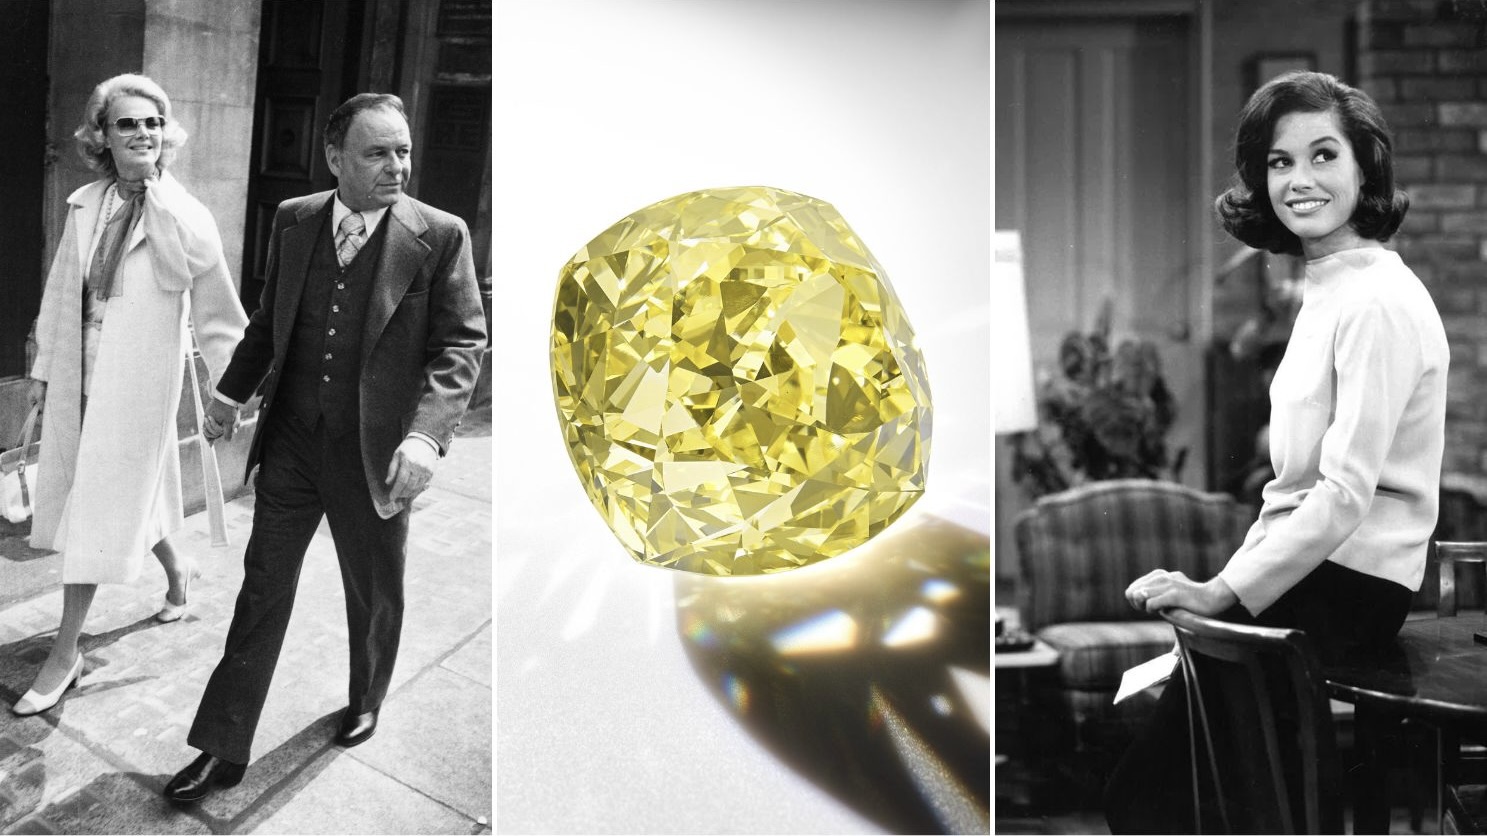 Sotheby's Auction House's upcoming sales will feature diamond treasures from Hollywood icons like Mary Tyler Moore and Frank Sinatra